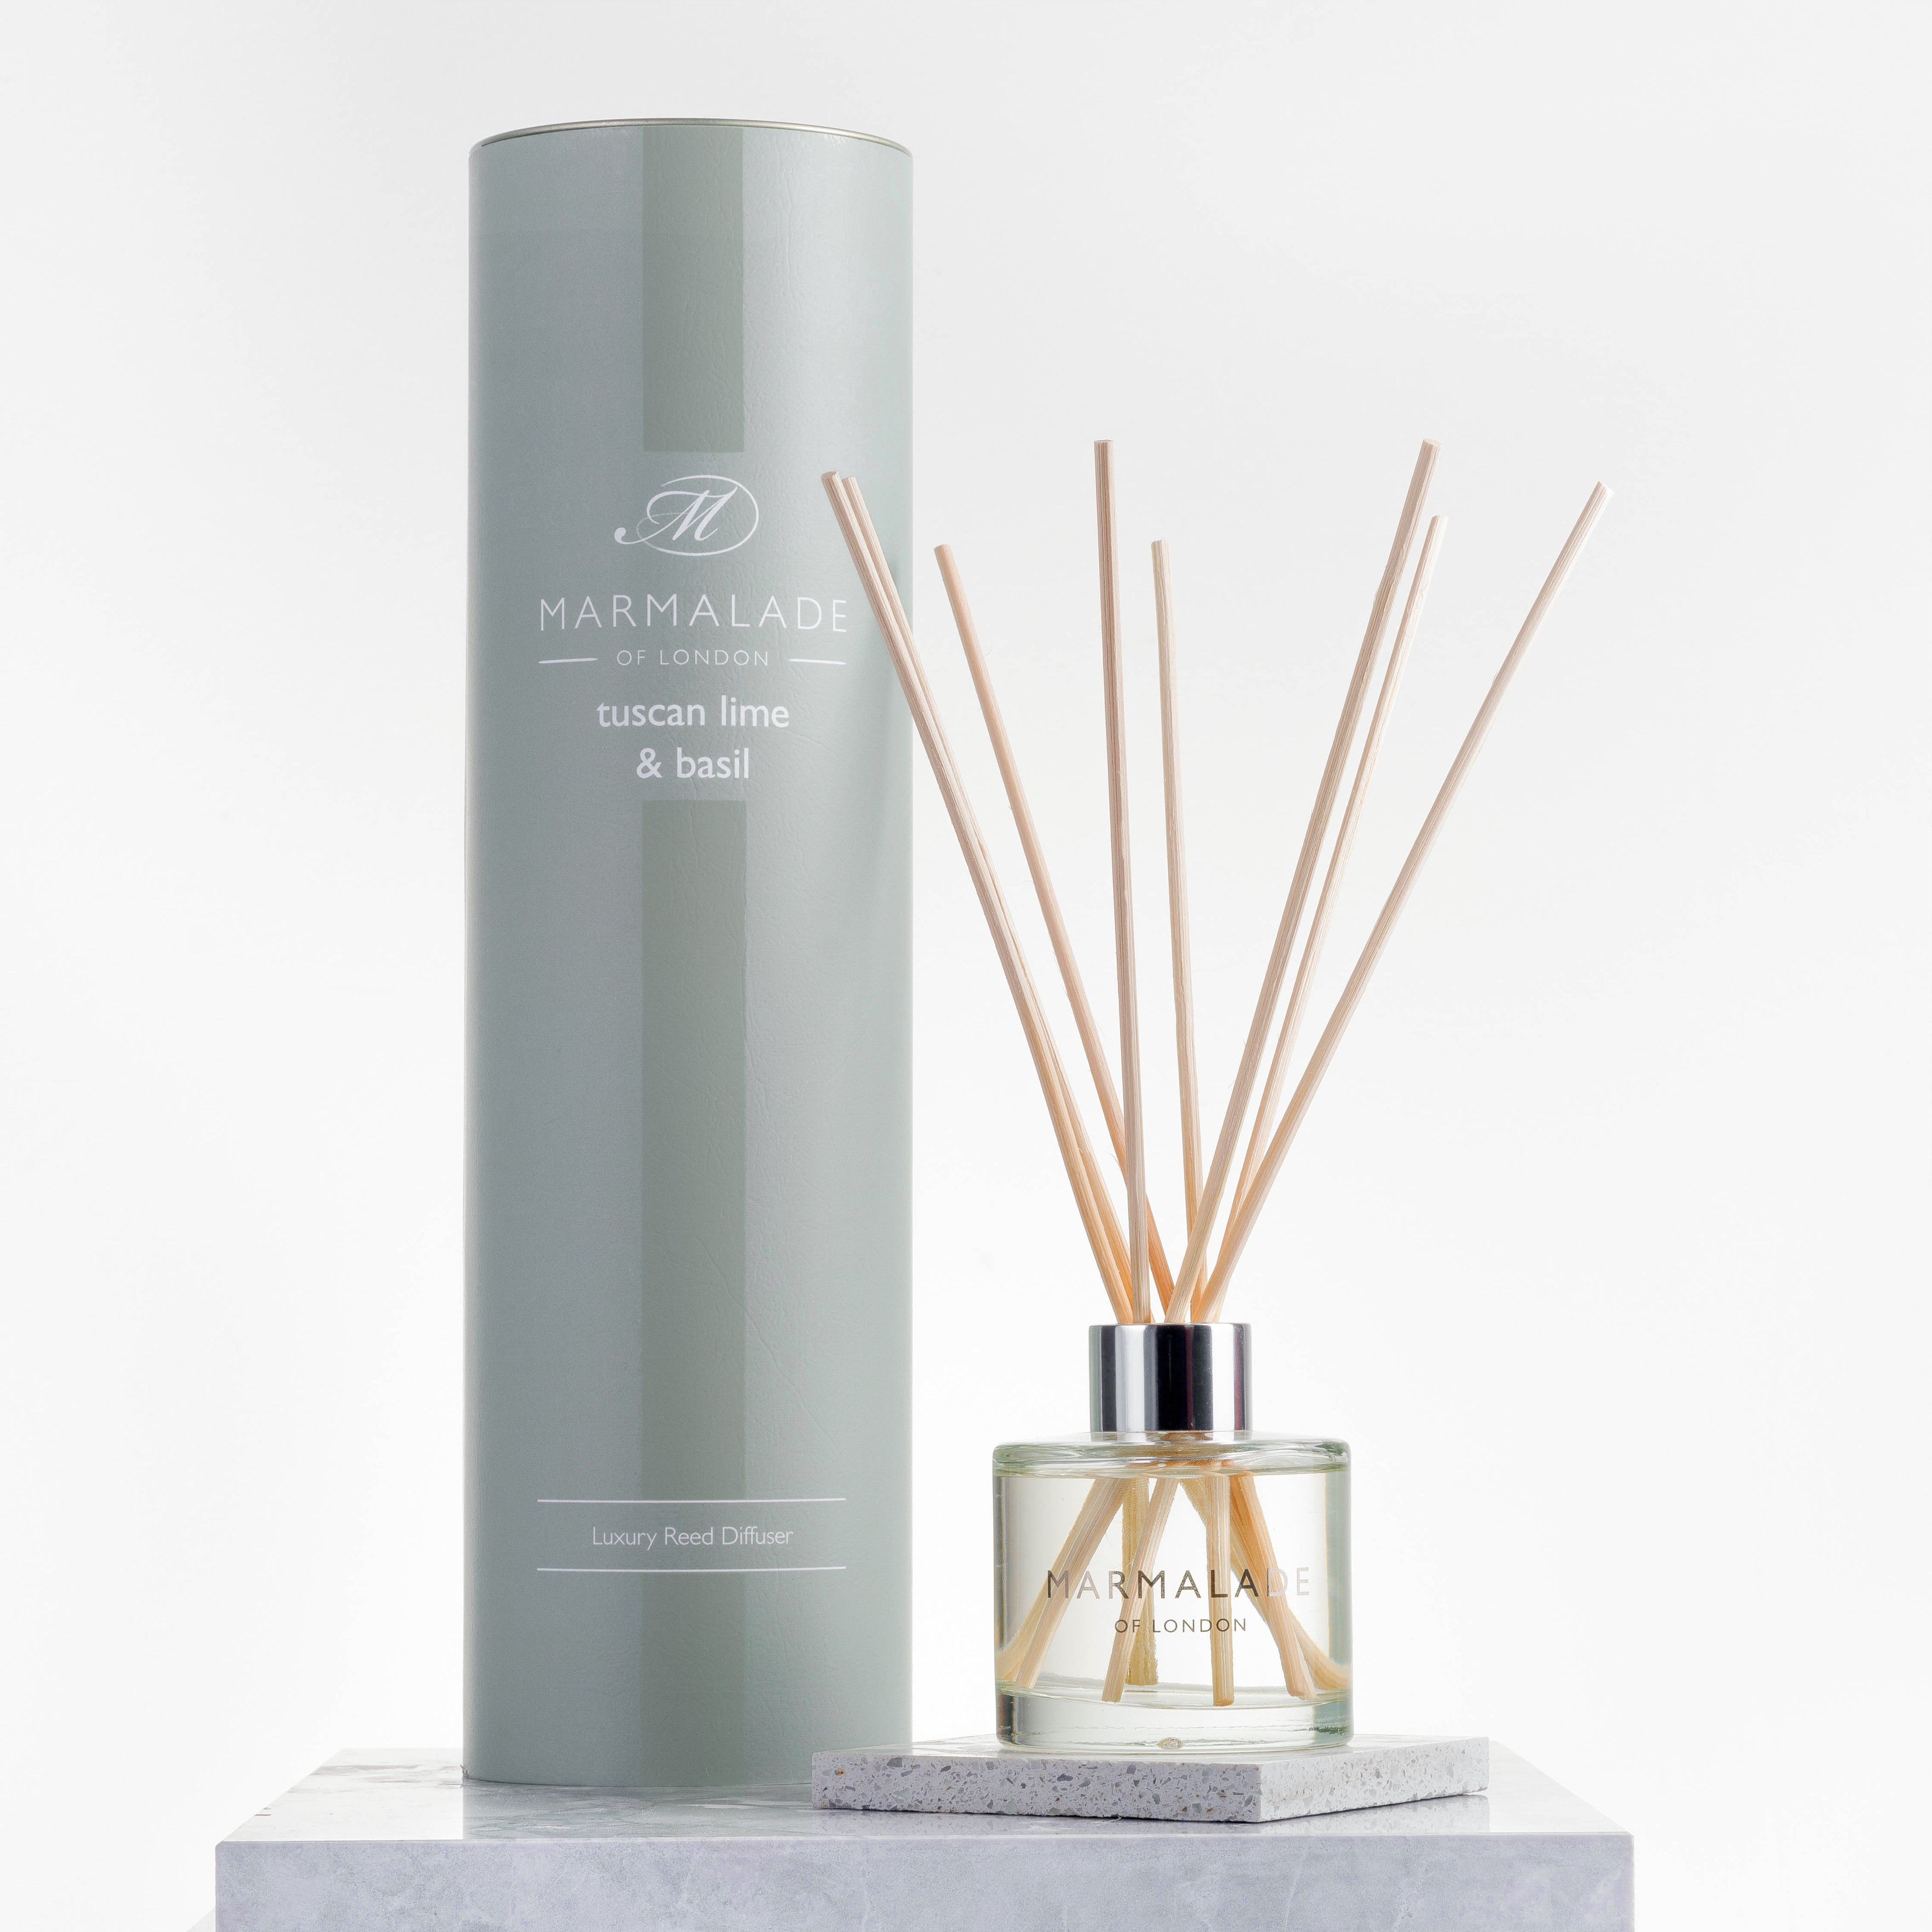 marmalade-of-london-tuscan-lime-and-basil-reed-diffuser